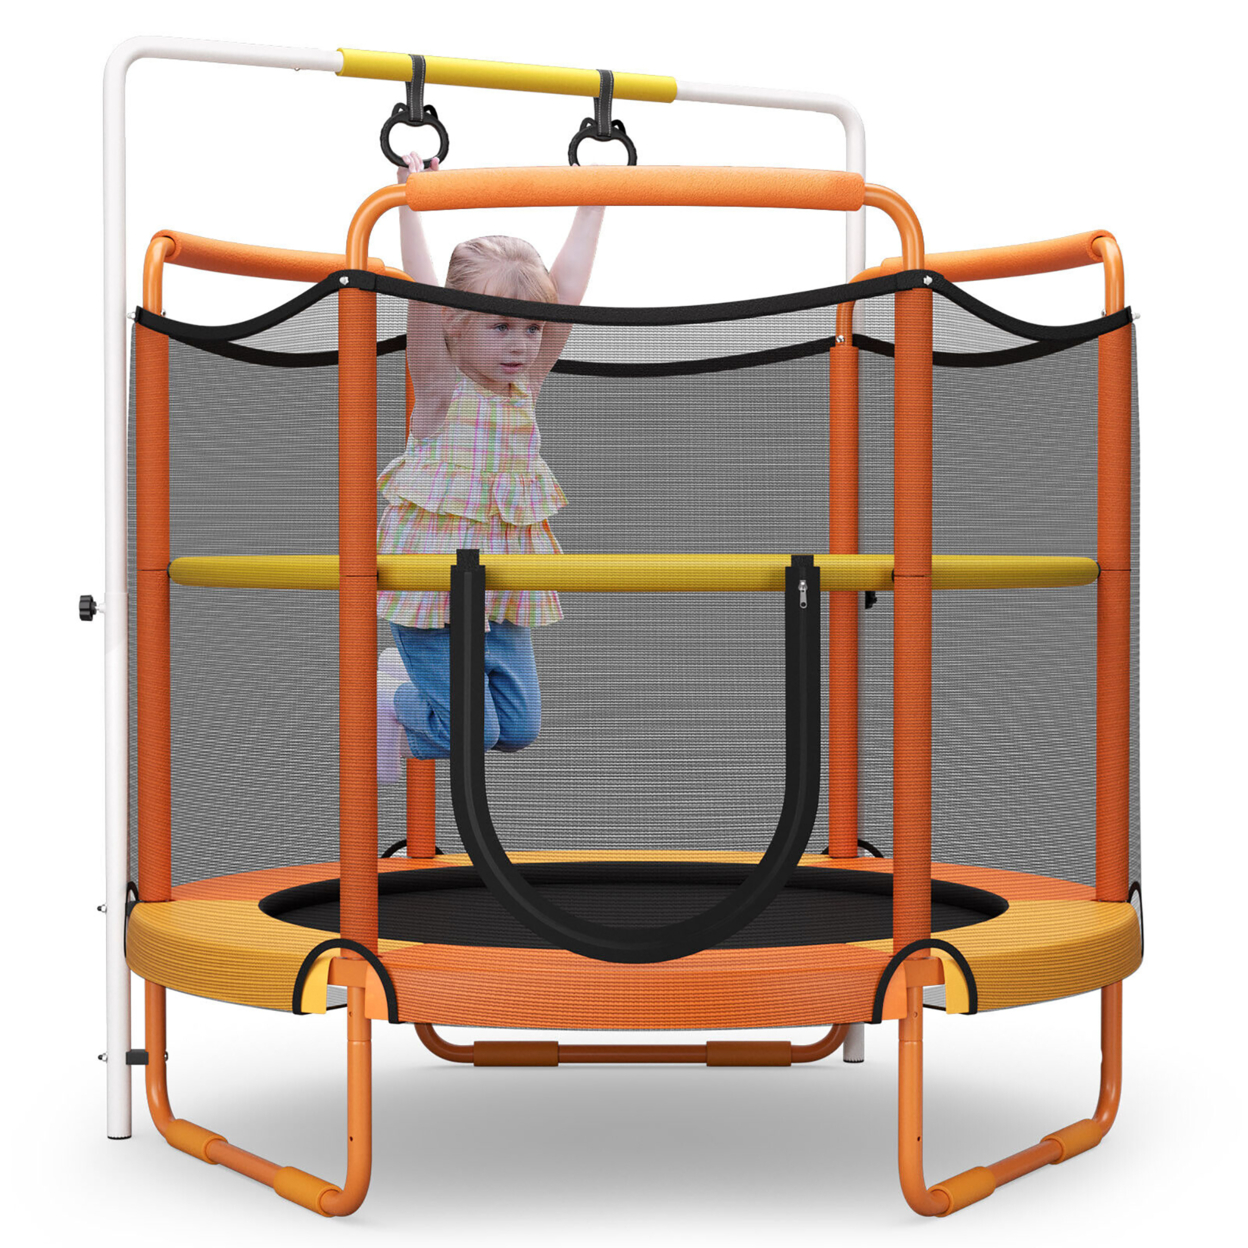 5FT Kids 3-in-1 Game Trampoline Seamless W/ Enclosure Net Spring Pad In/ Outdoor